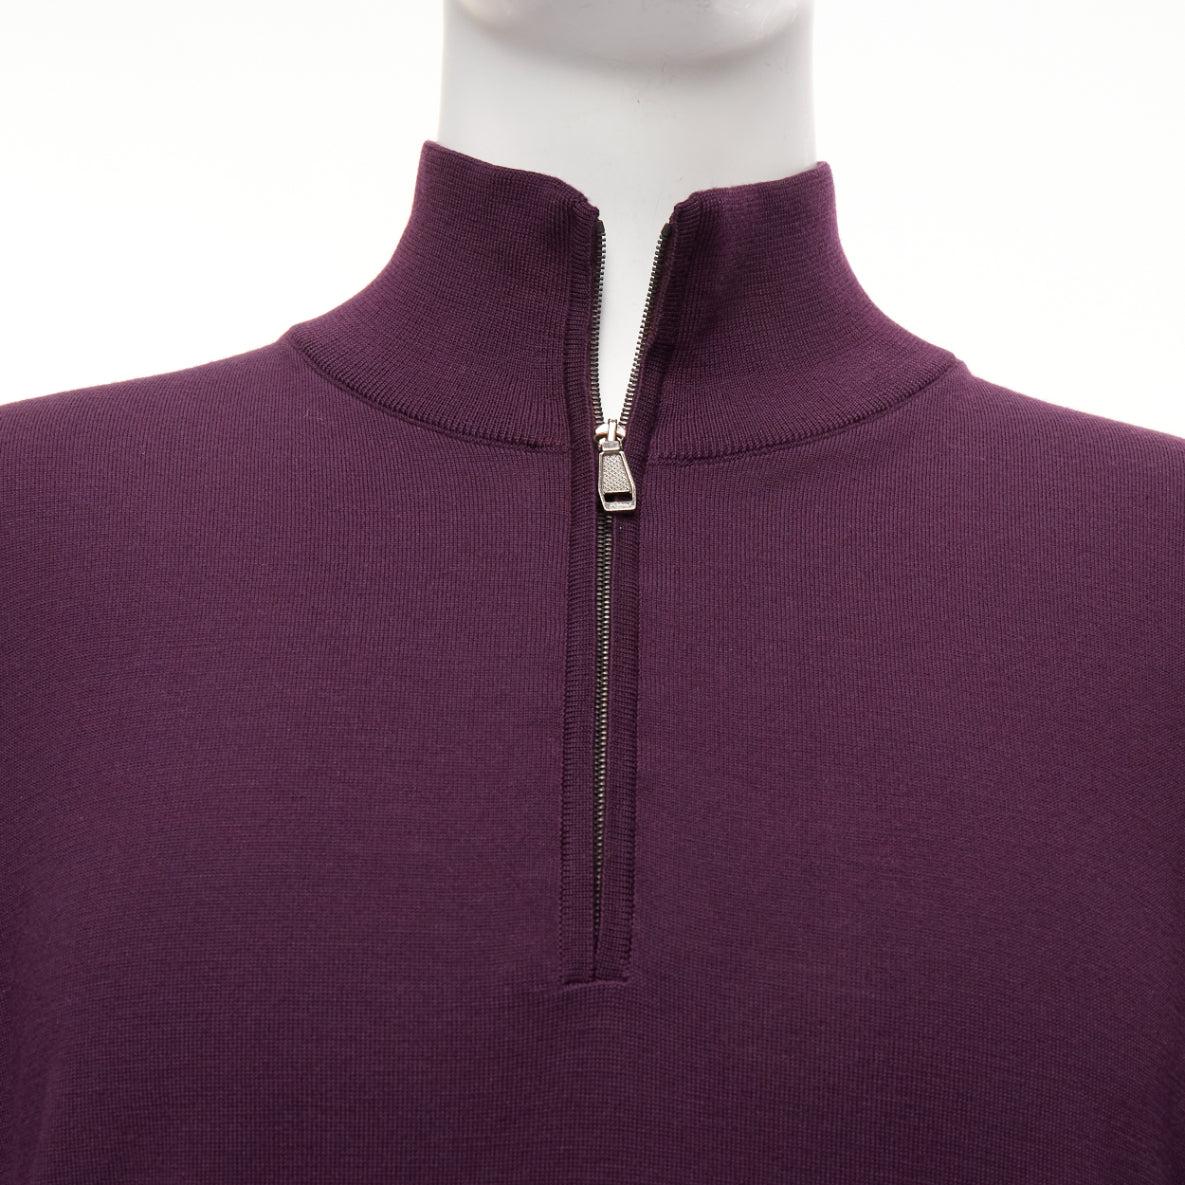 BRIONI 100% wool eggplant purple silk trimmed half zip long sleeve sweater
Reference: JSLE/A00124
Brand: Brioni
Material: Wool, Silk
Color: Purple
Pattern: Solid
Closure: Zip
Extra Details: Front logo zip.
Made in: Italy

CONDITION:
Condition: Good,